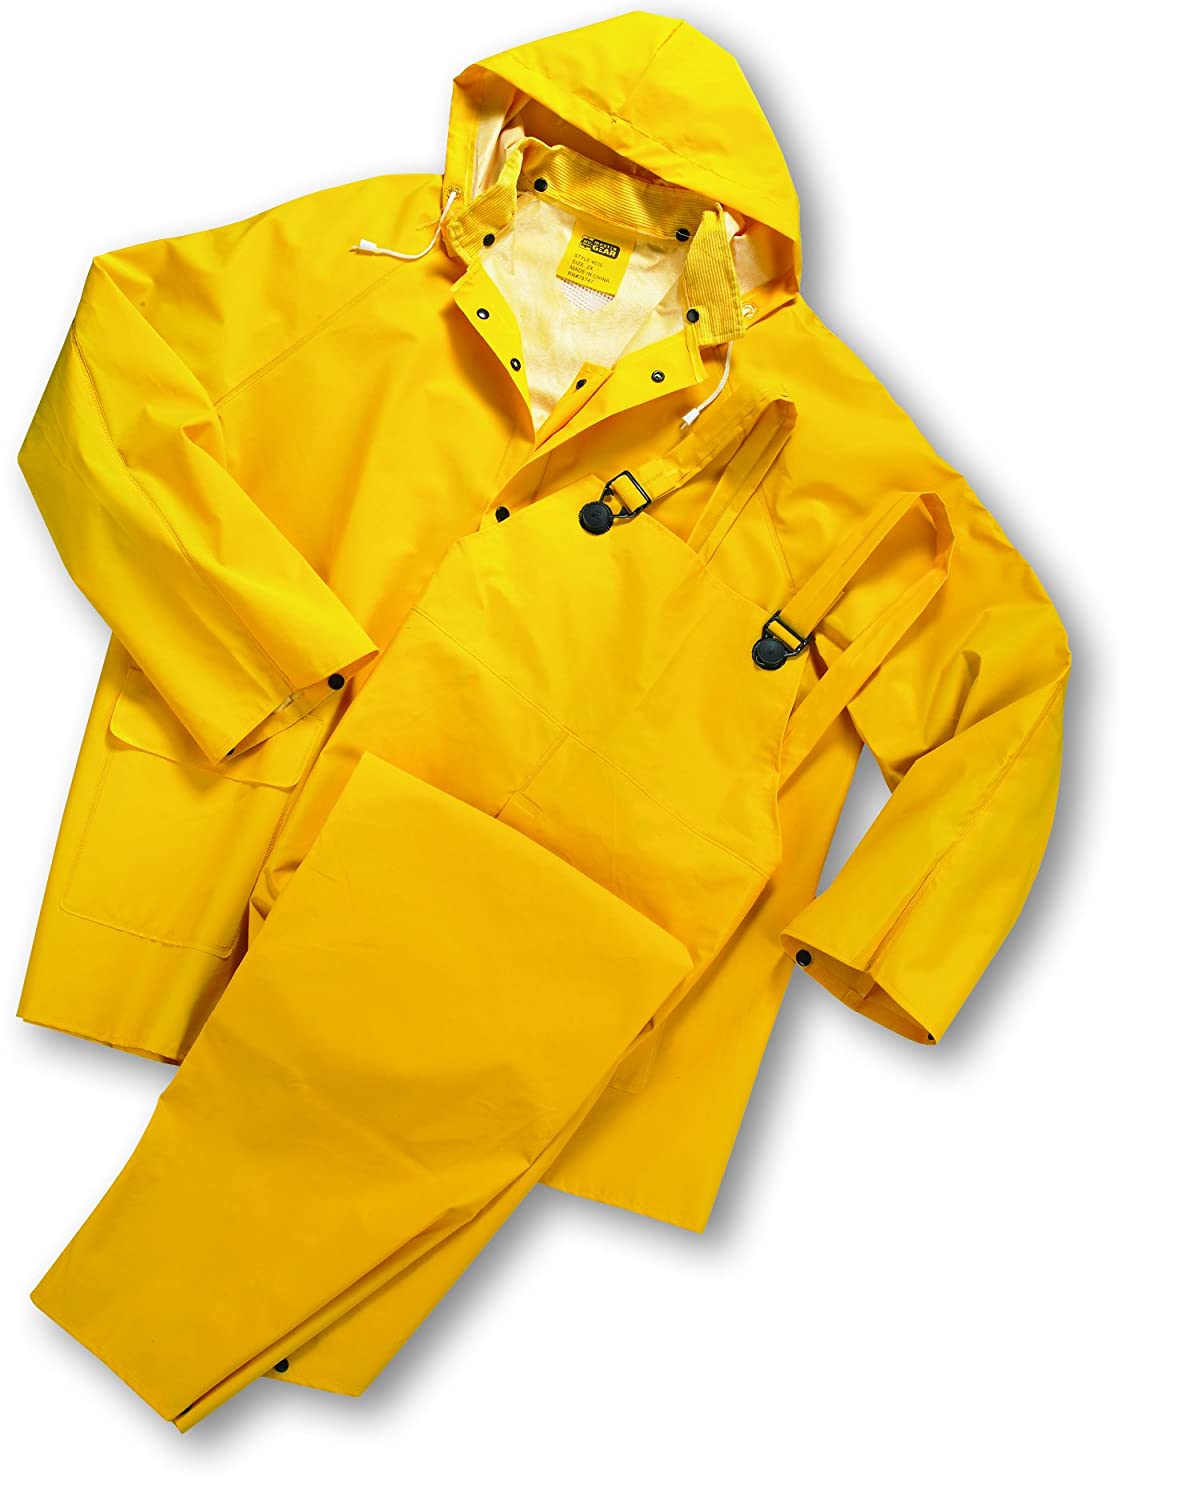 West Chester 4035 Polyester Rain suit [Yellow] Medium, 0.35 mm PVC Coating, 3 Pcs Suit with Jacket, Removable Hood, Overall